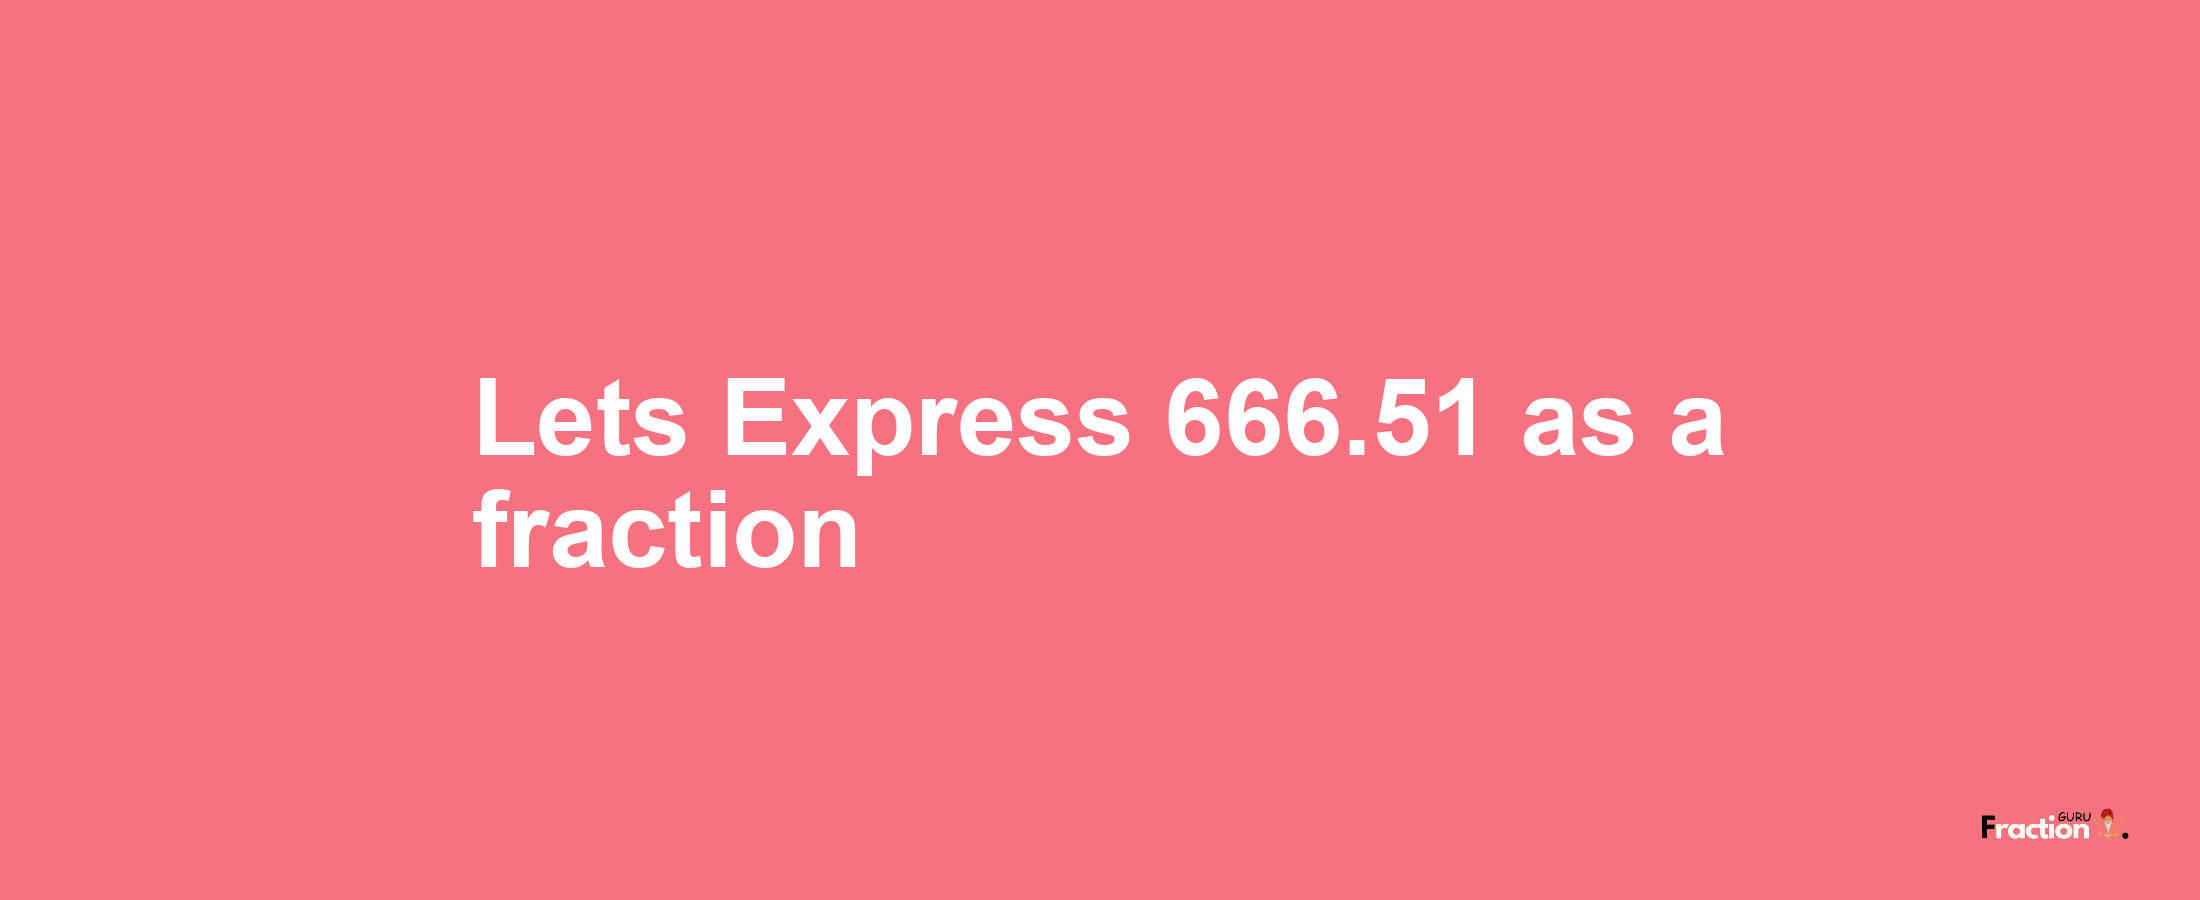 Lets Express 666.51 as afraction